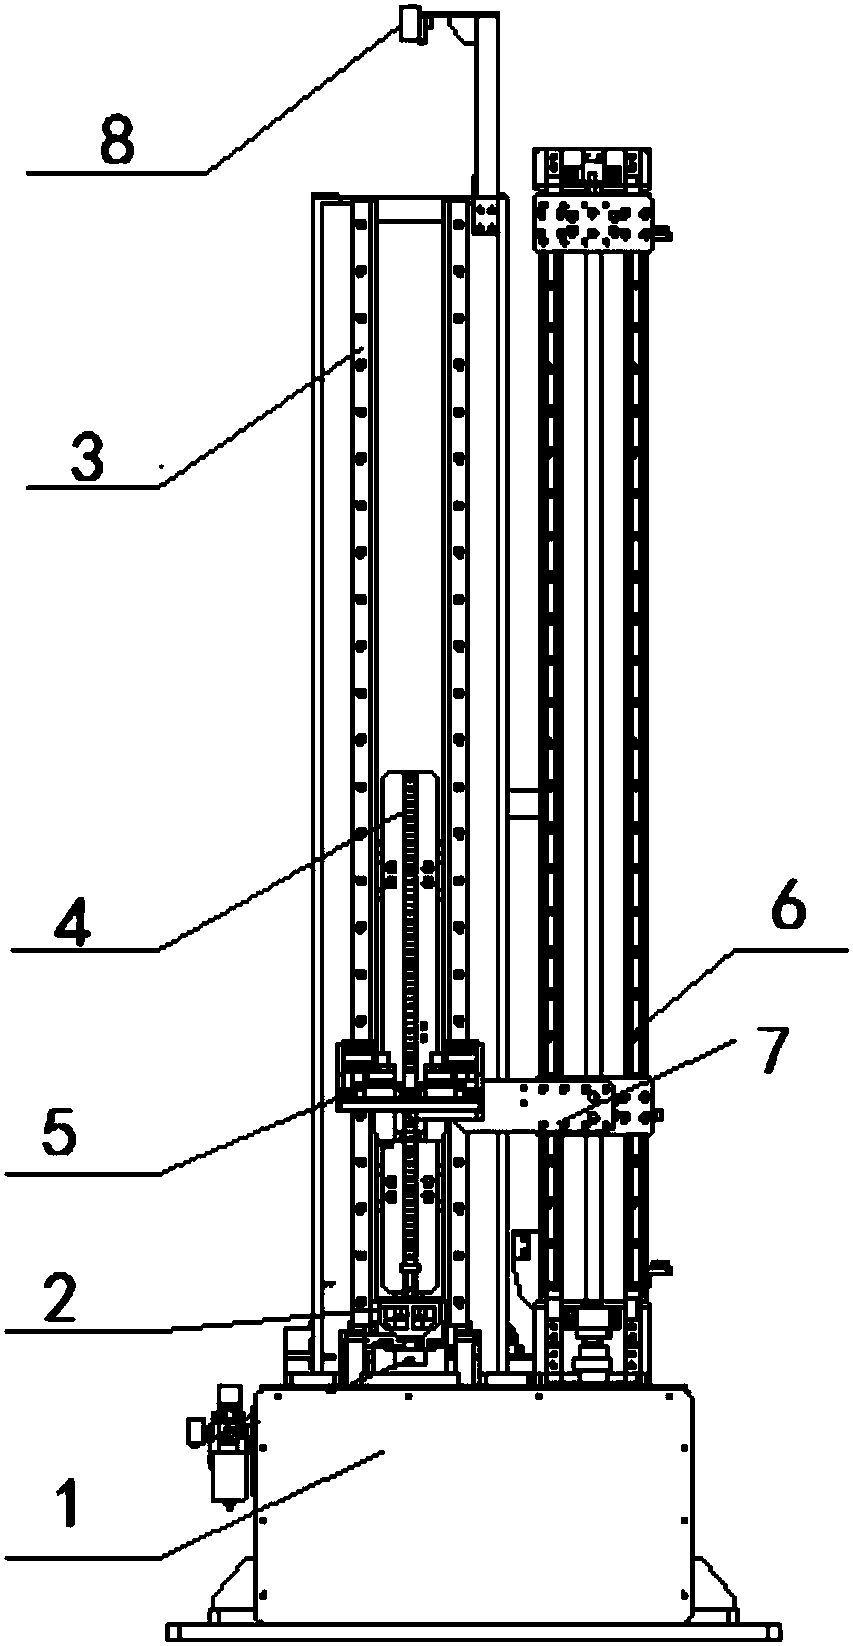 Guiding and locking device for testing degree of impact sensitivity of initiating explosive device